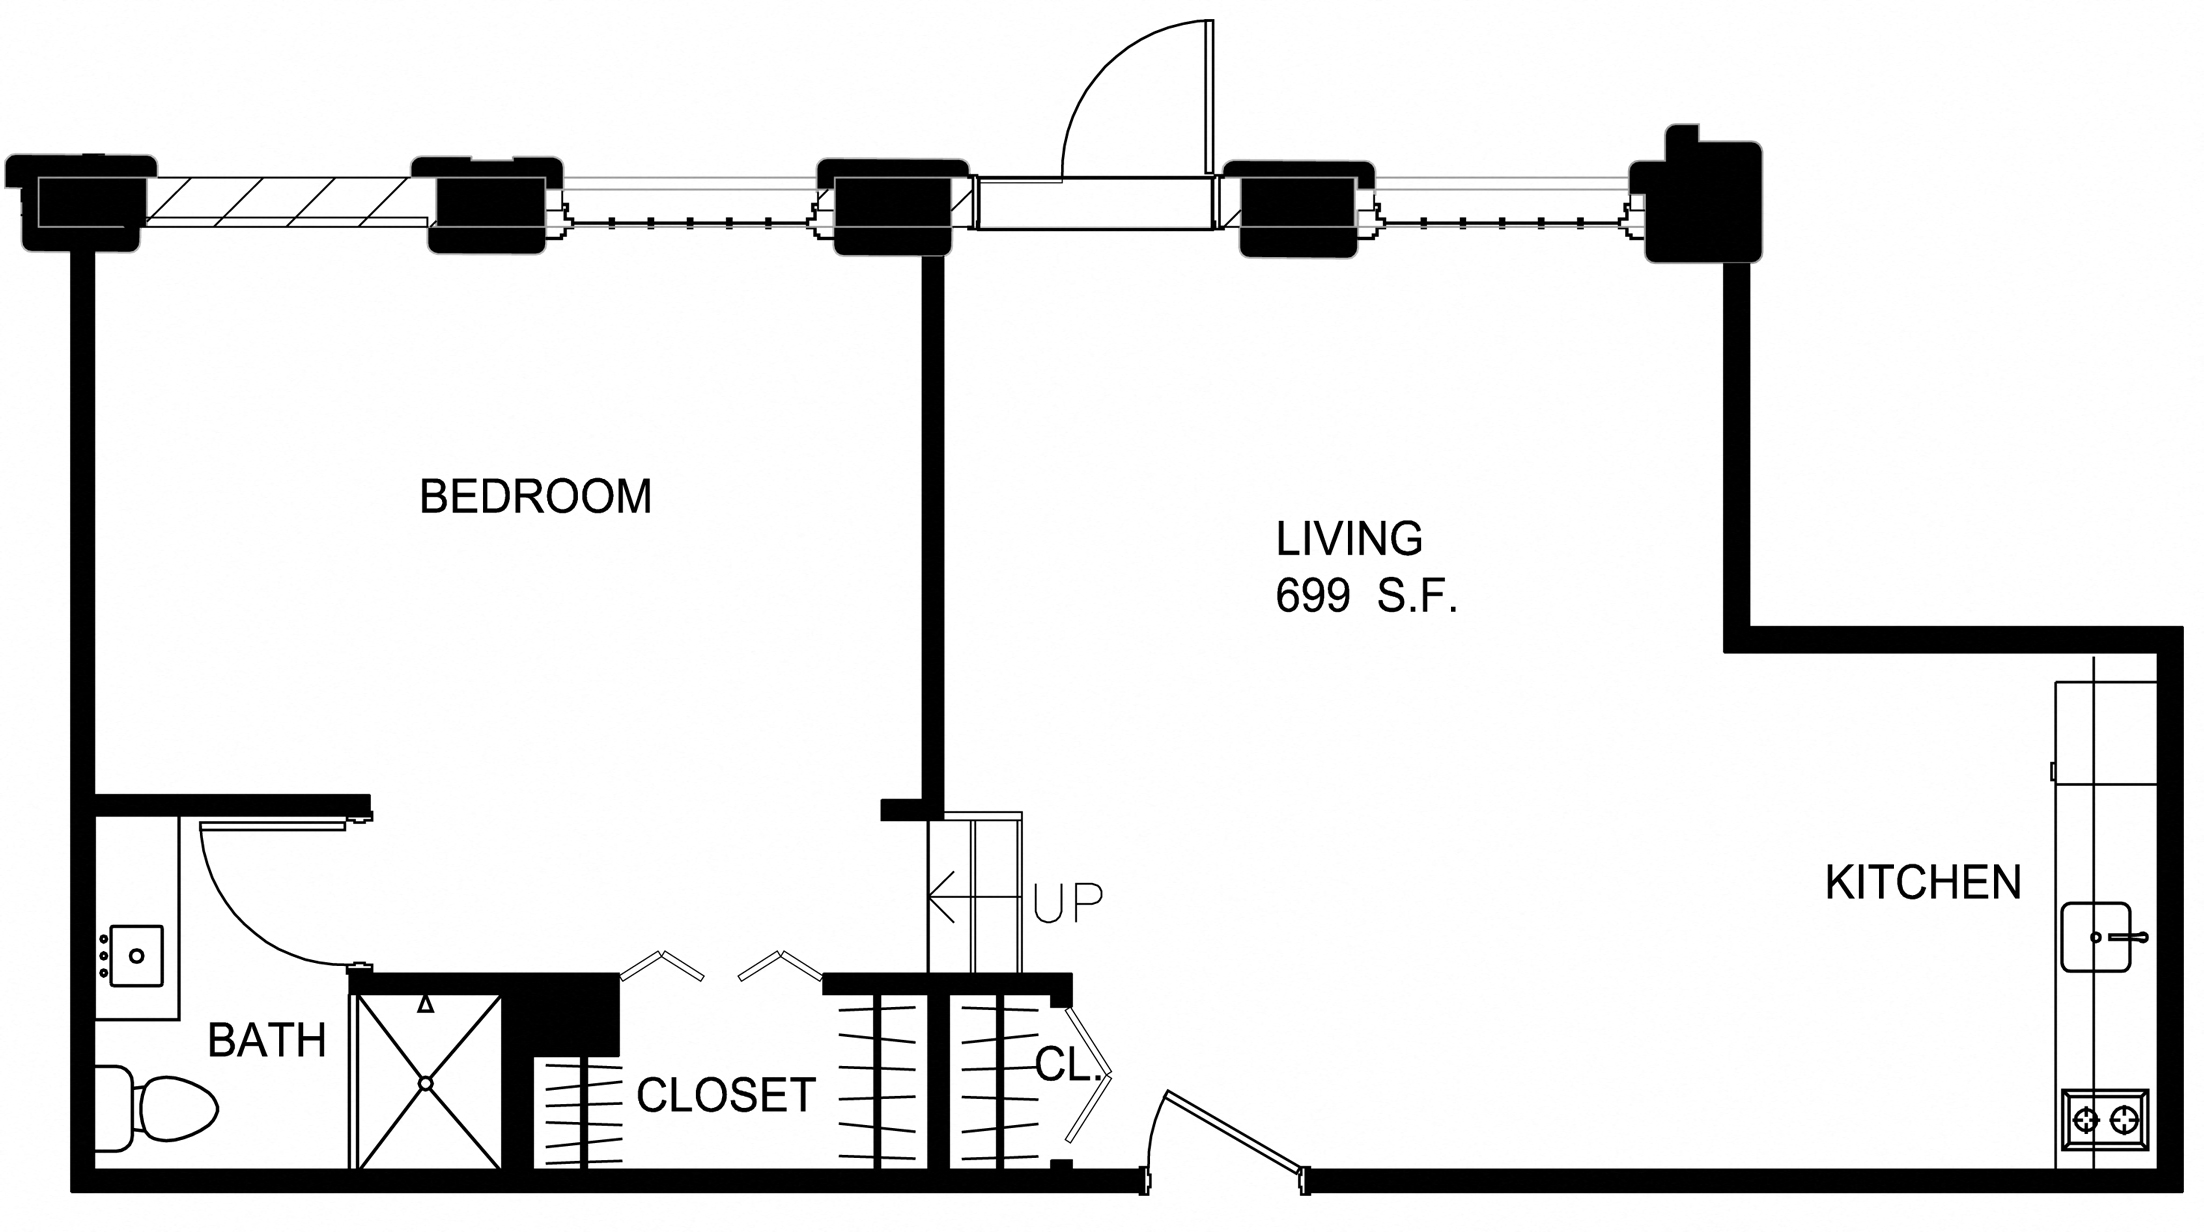 Floorplan for Apartment #S2112, 0 bedroom unit at Halstead Providence